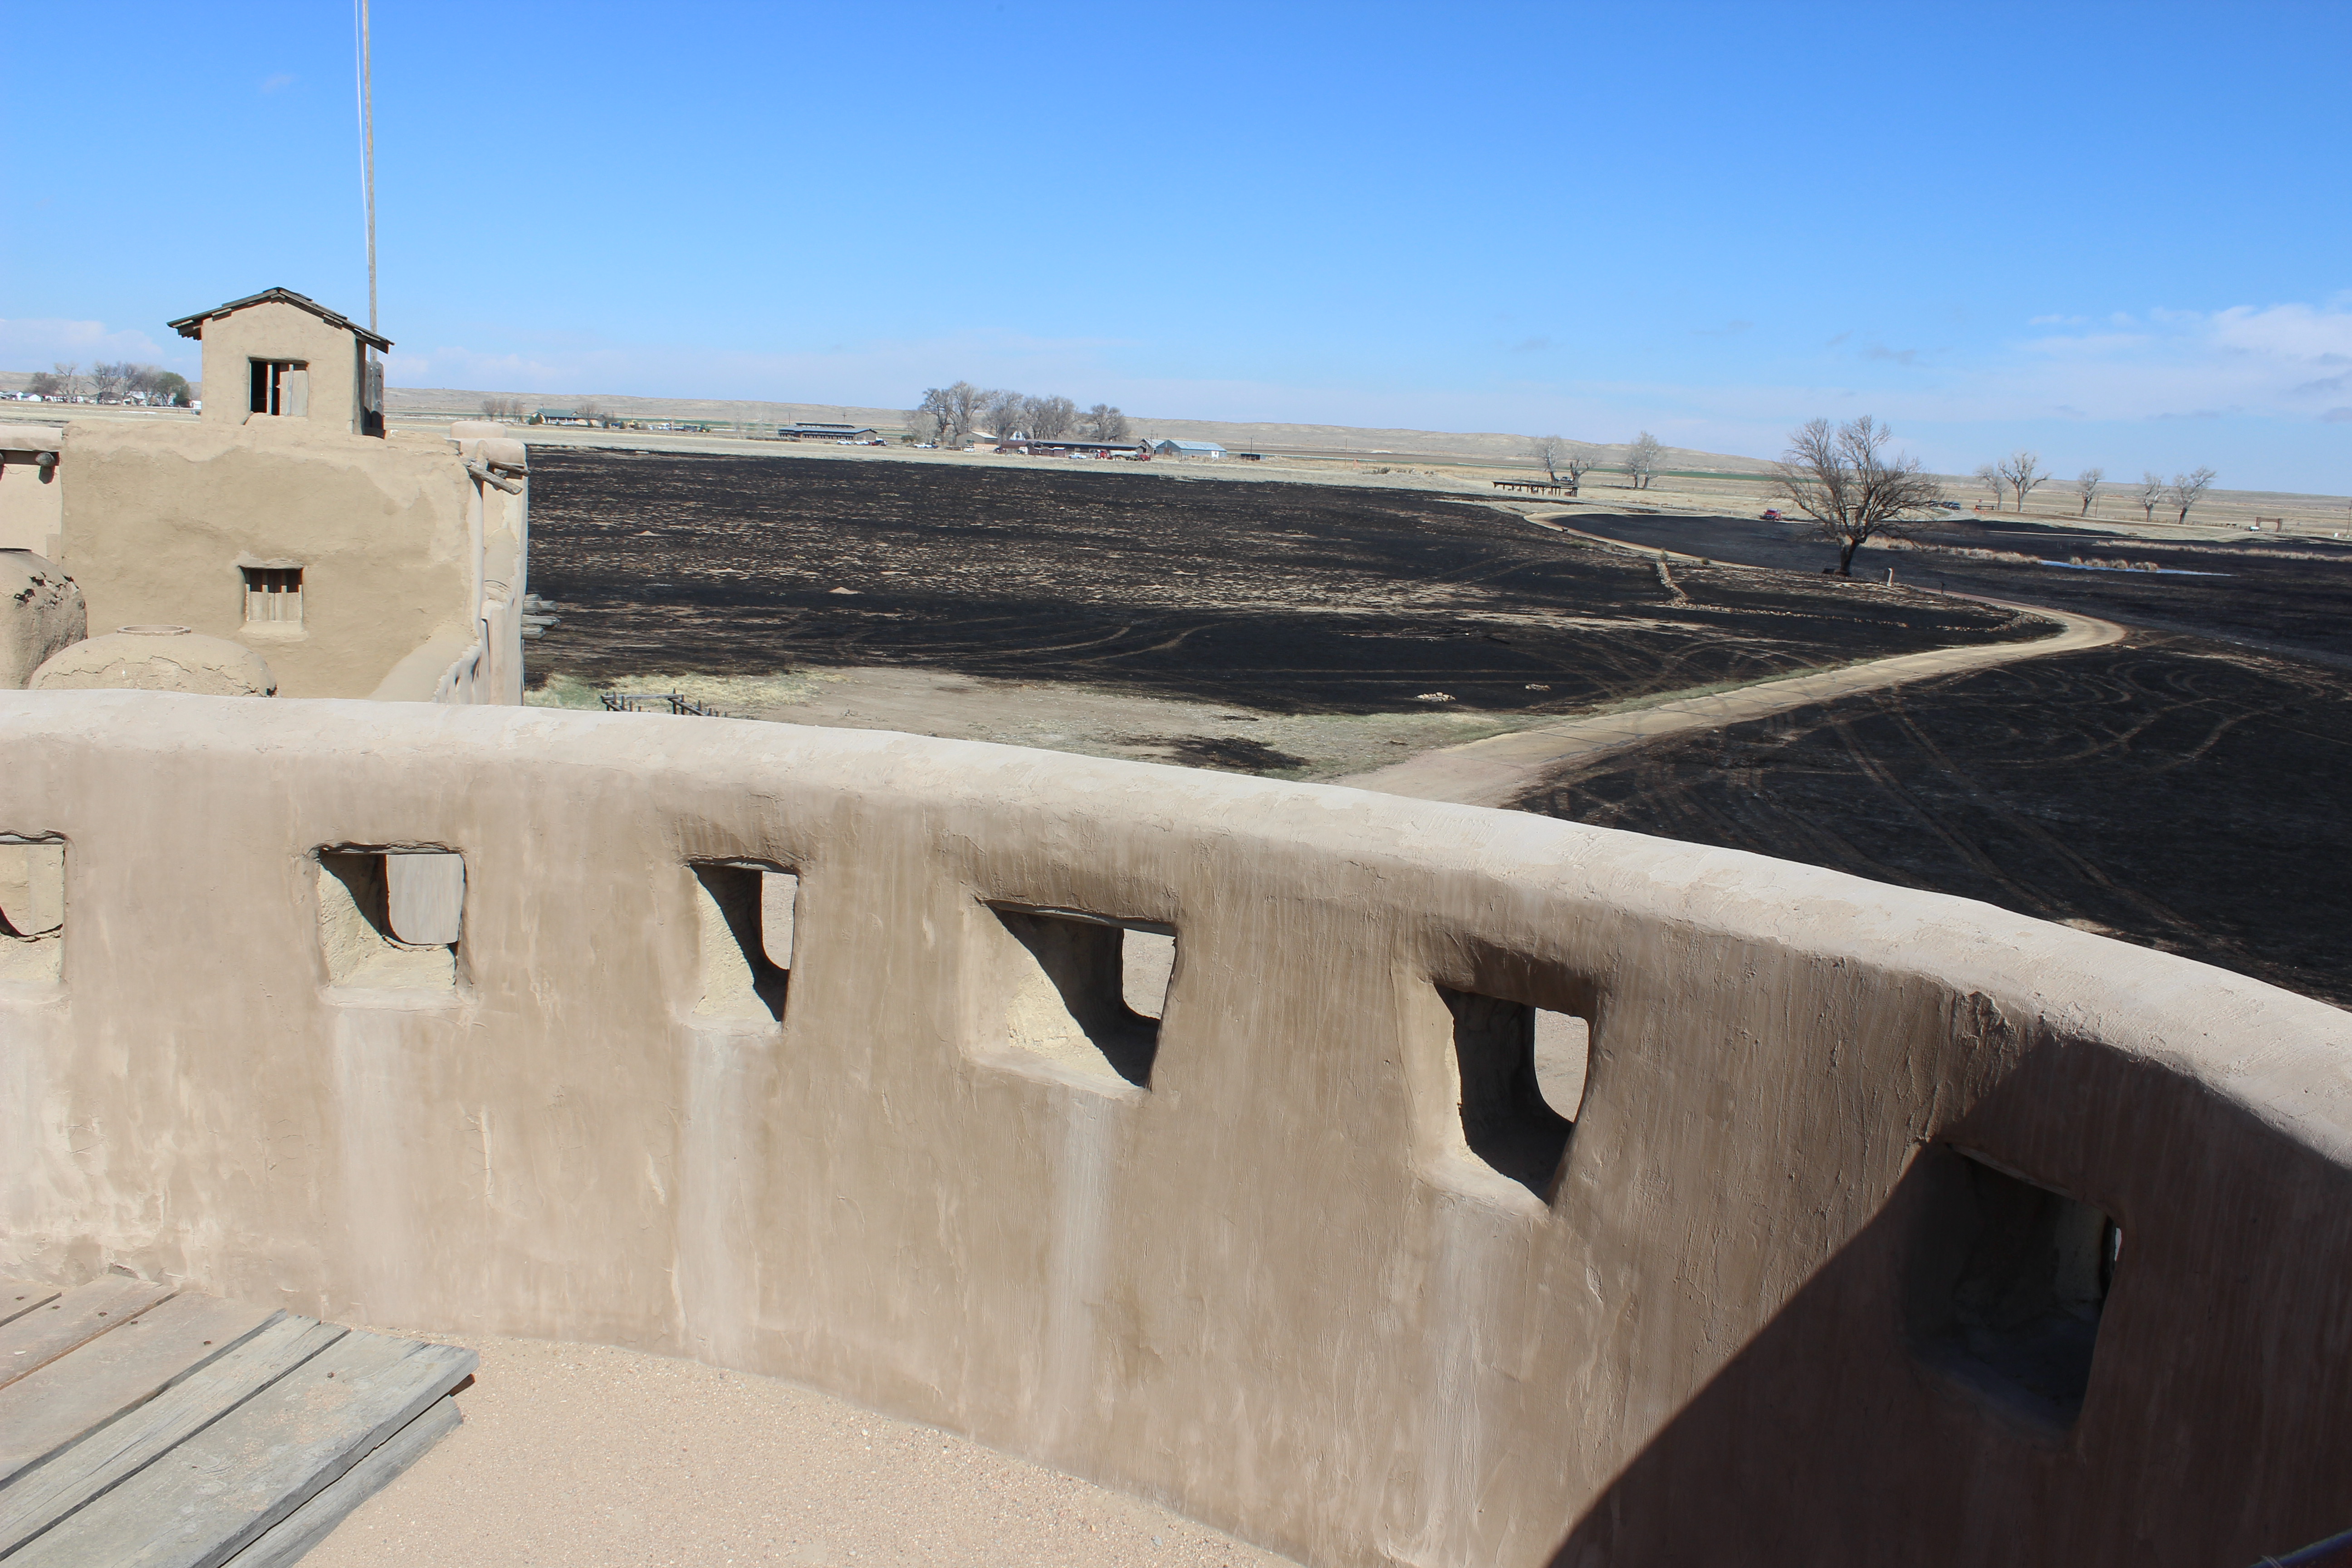 Burned area as seen from inside Bent's Old Fort on 4/13/22